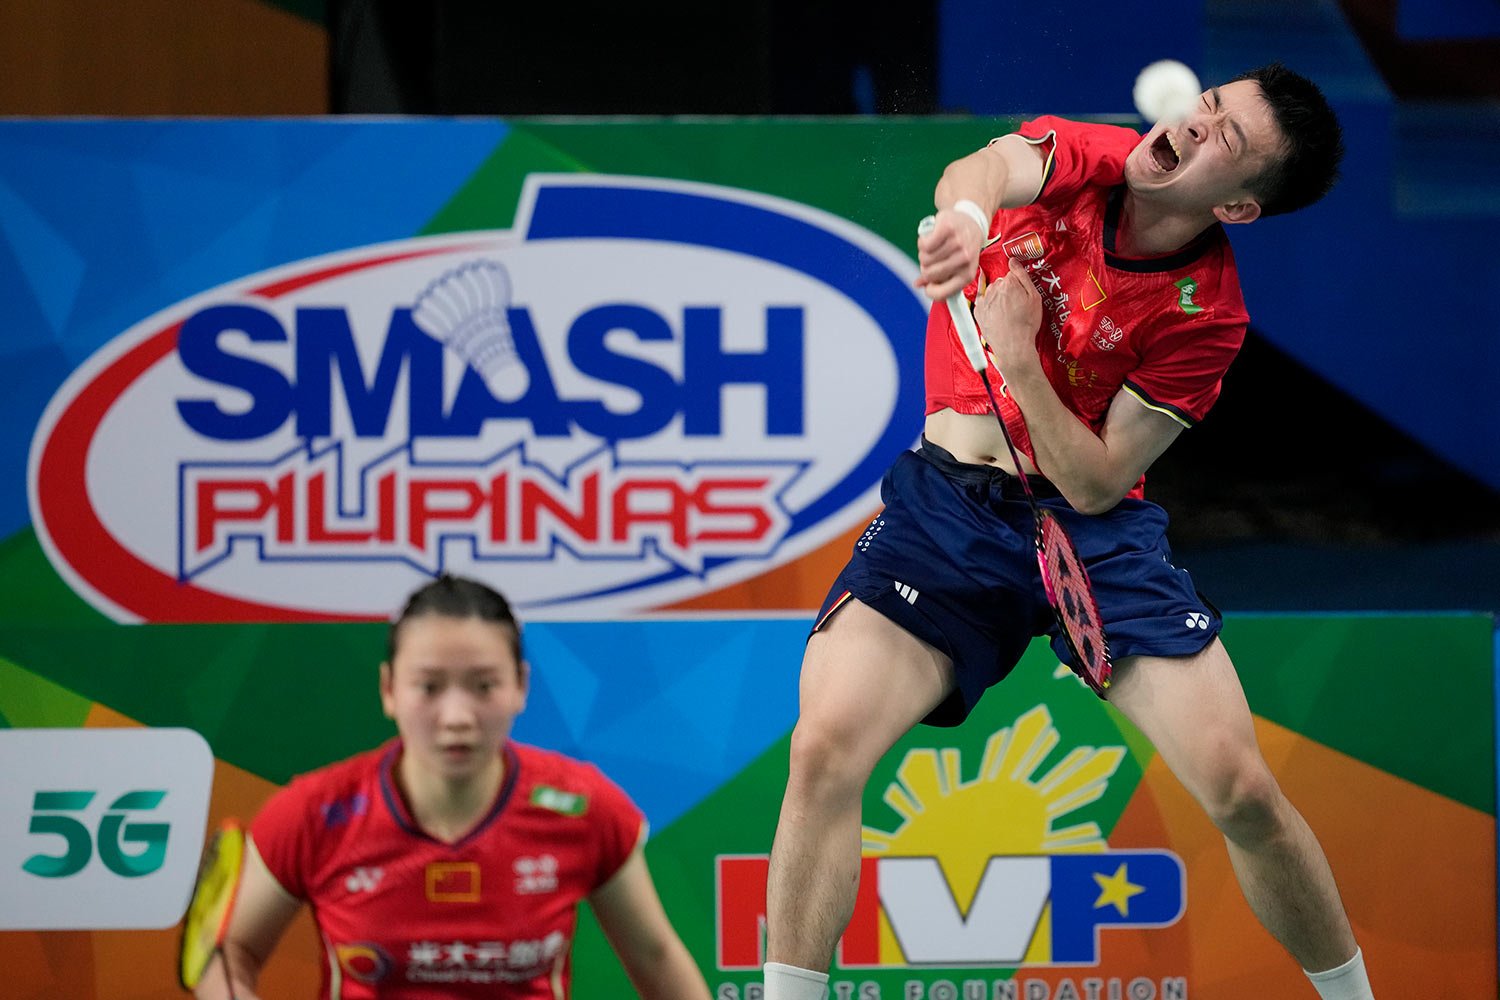  China's Zheng Si Wei, right, and Huang ya Qiong play against Thailand's R. Makkasasithorn and J. Sudjaipraparat during their mixed doubles match at the Badminton Asia Championships 2022 at Muntinlupa, Philippines on Tuesday, April 26, 2022. (AP Phot